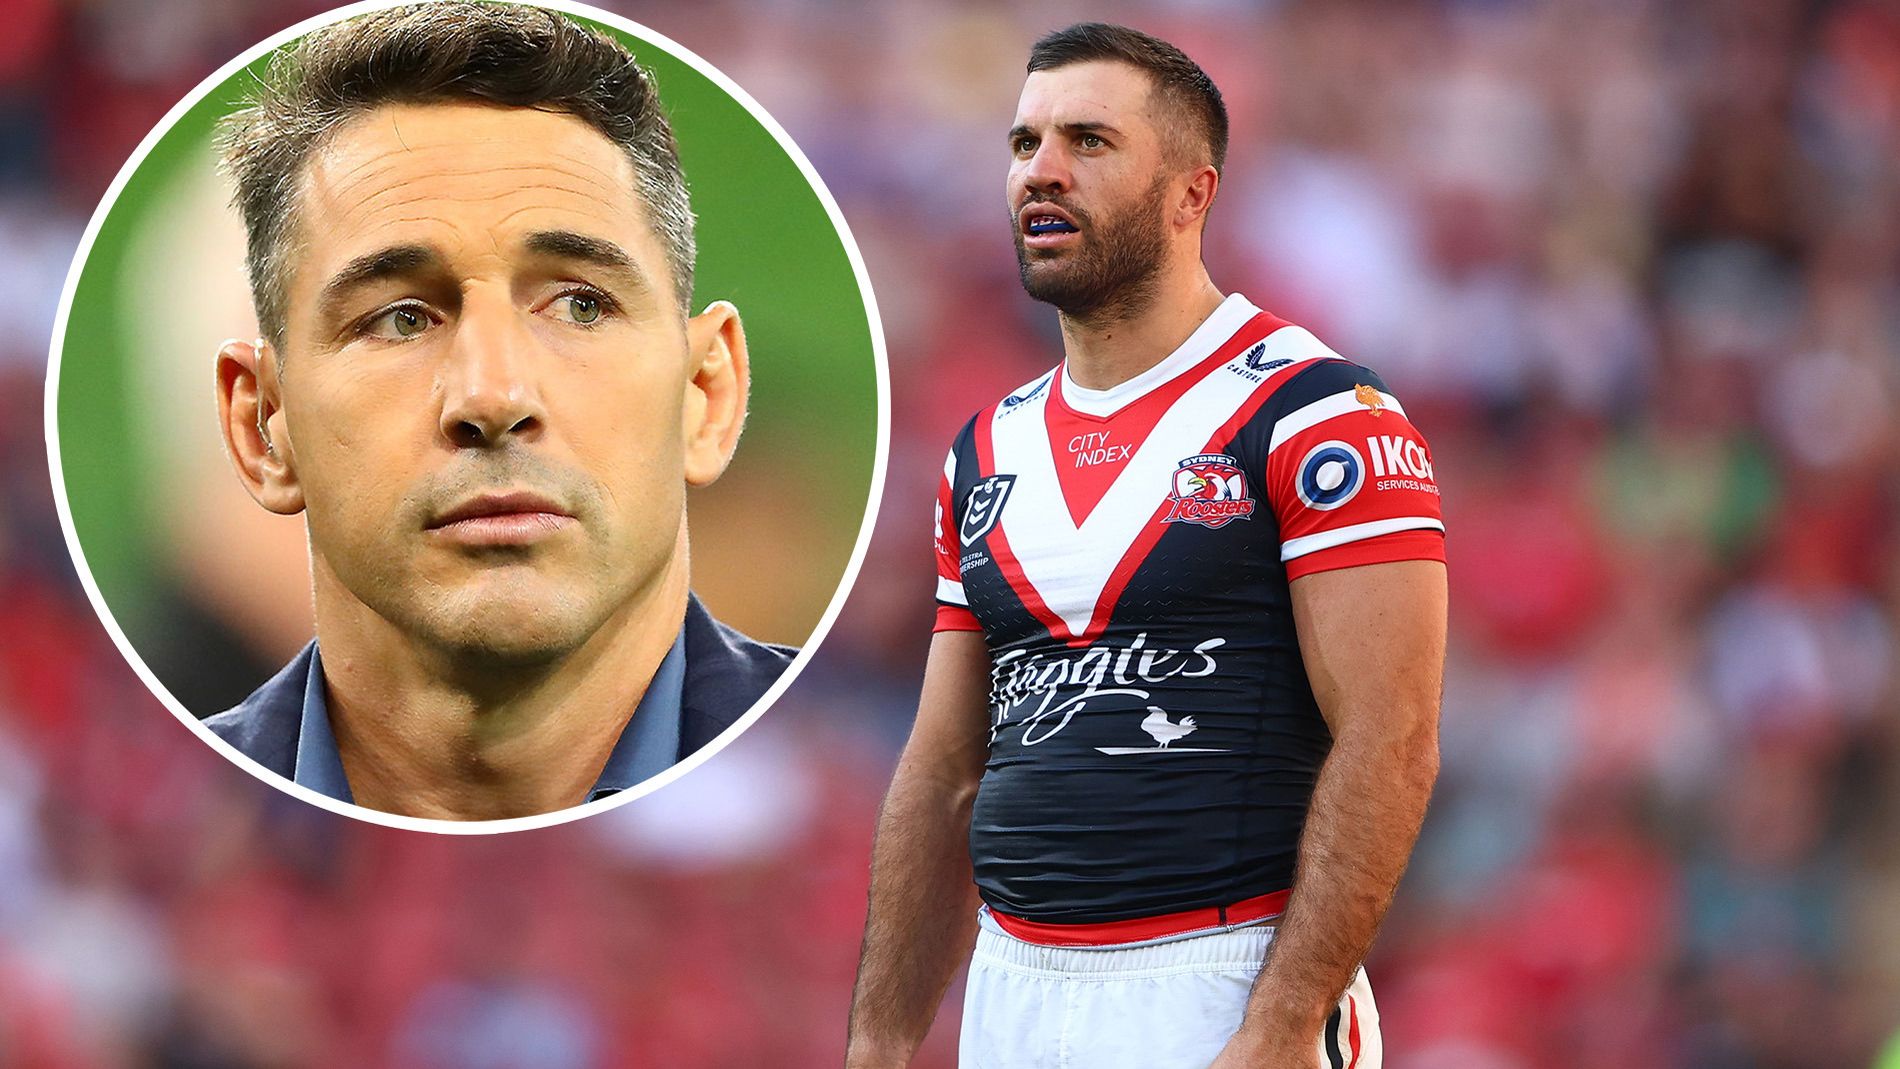 EXCLUSIVE: Billy Slater reveals cocky Roosters comments before round one 'reality check'